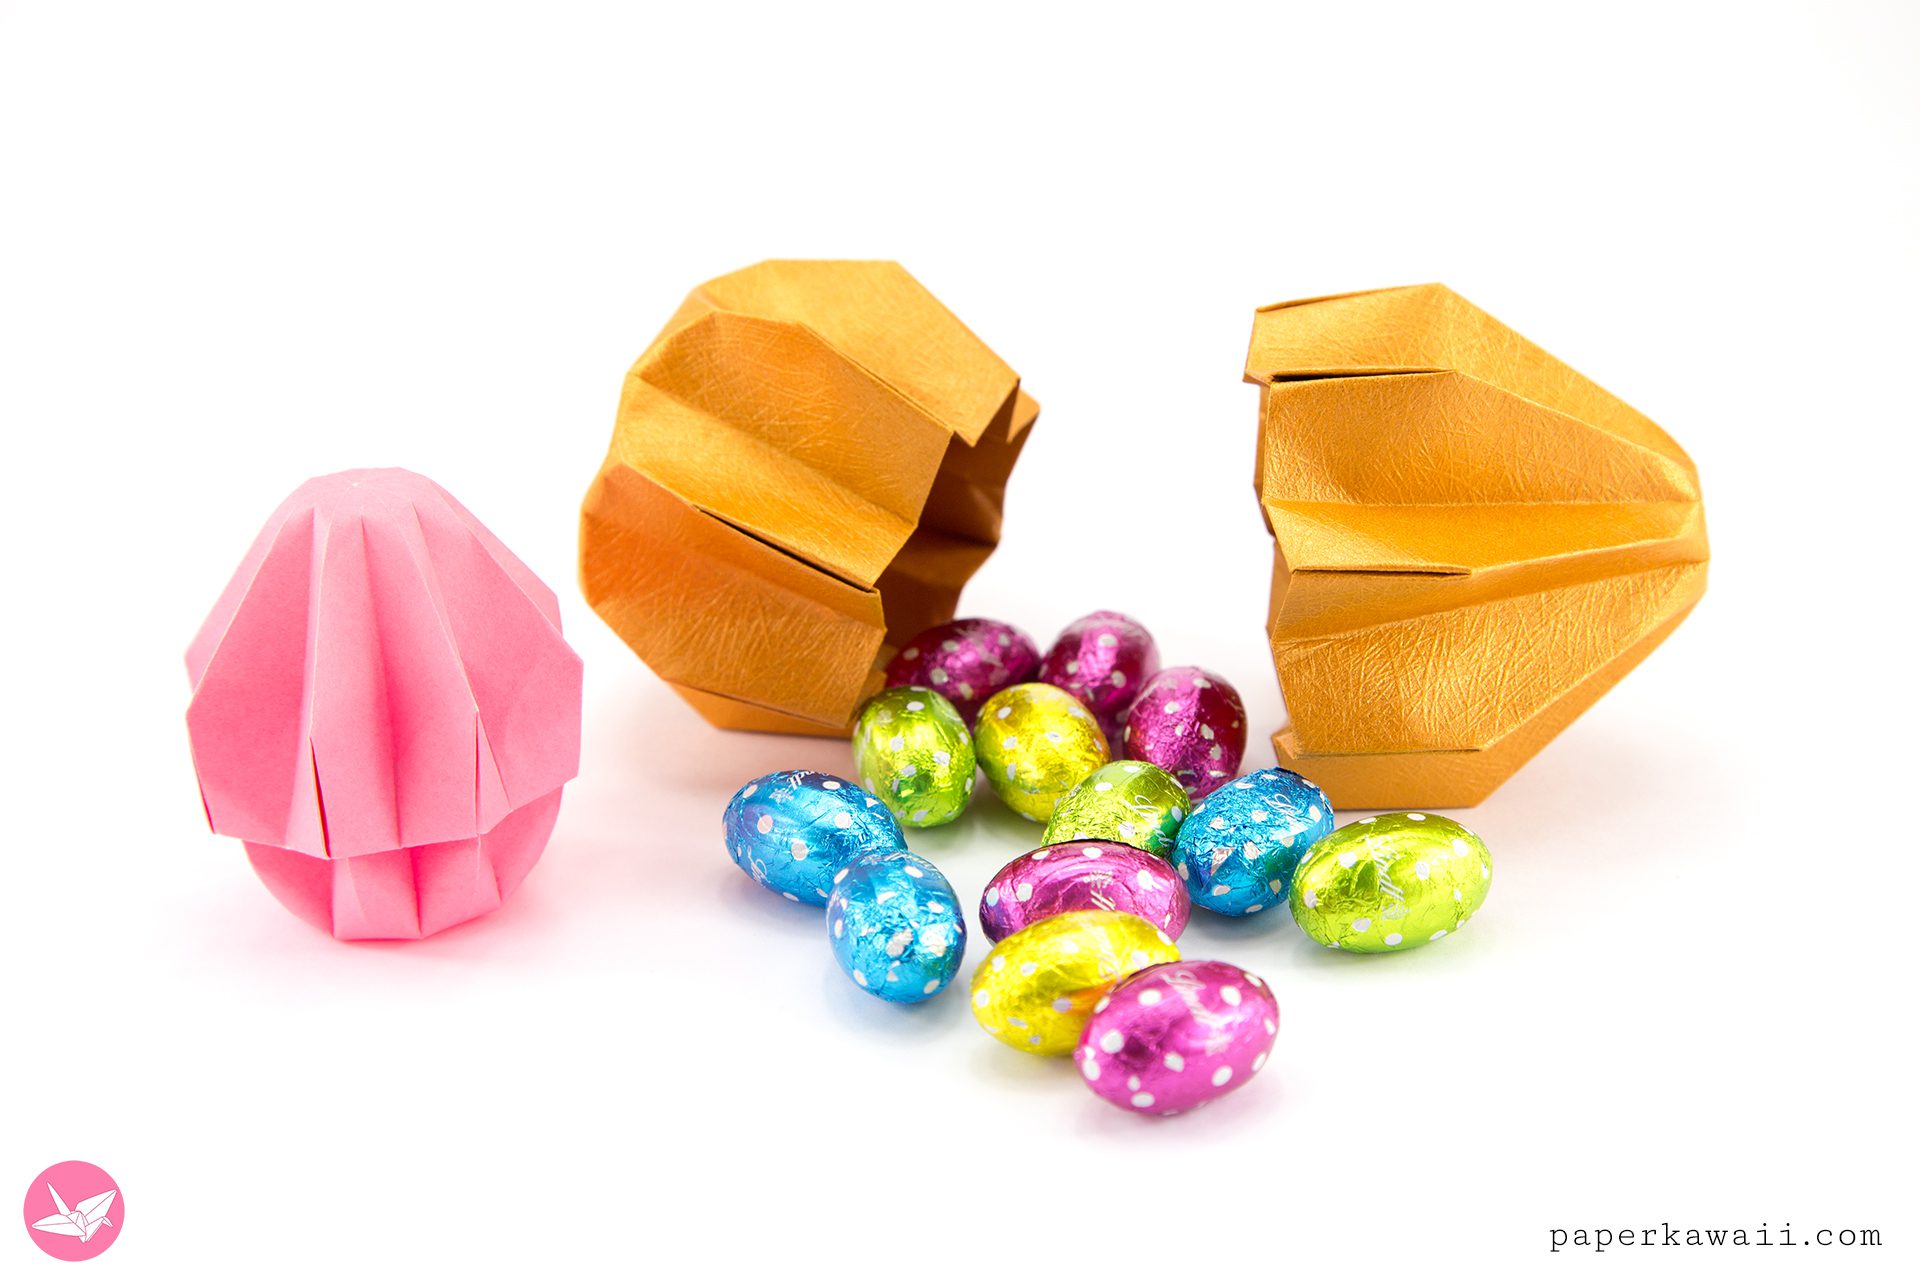 An openable origami easter egg! Put mini eggs, bunnies or chicks inside.